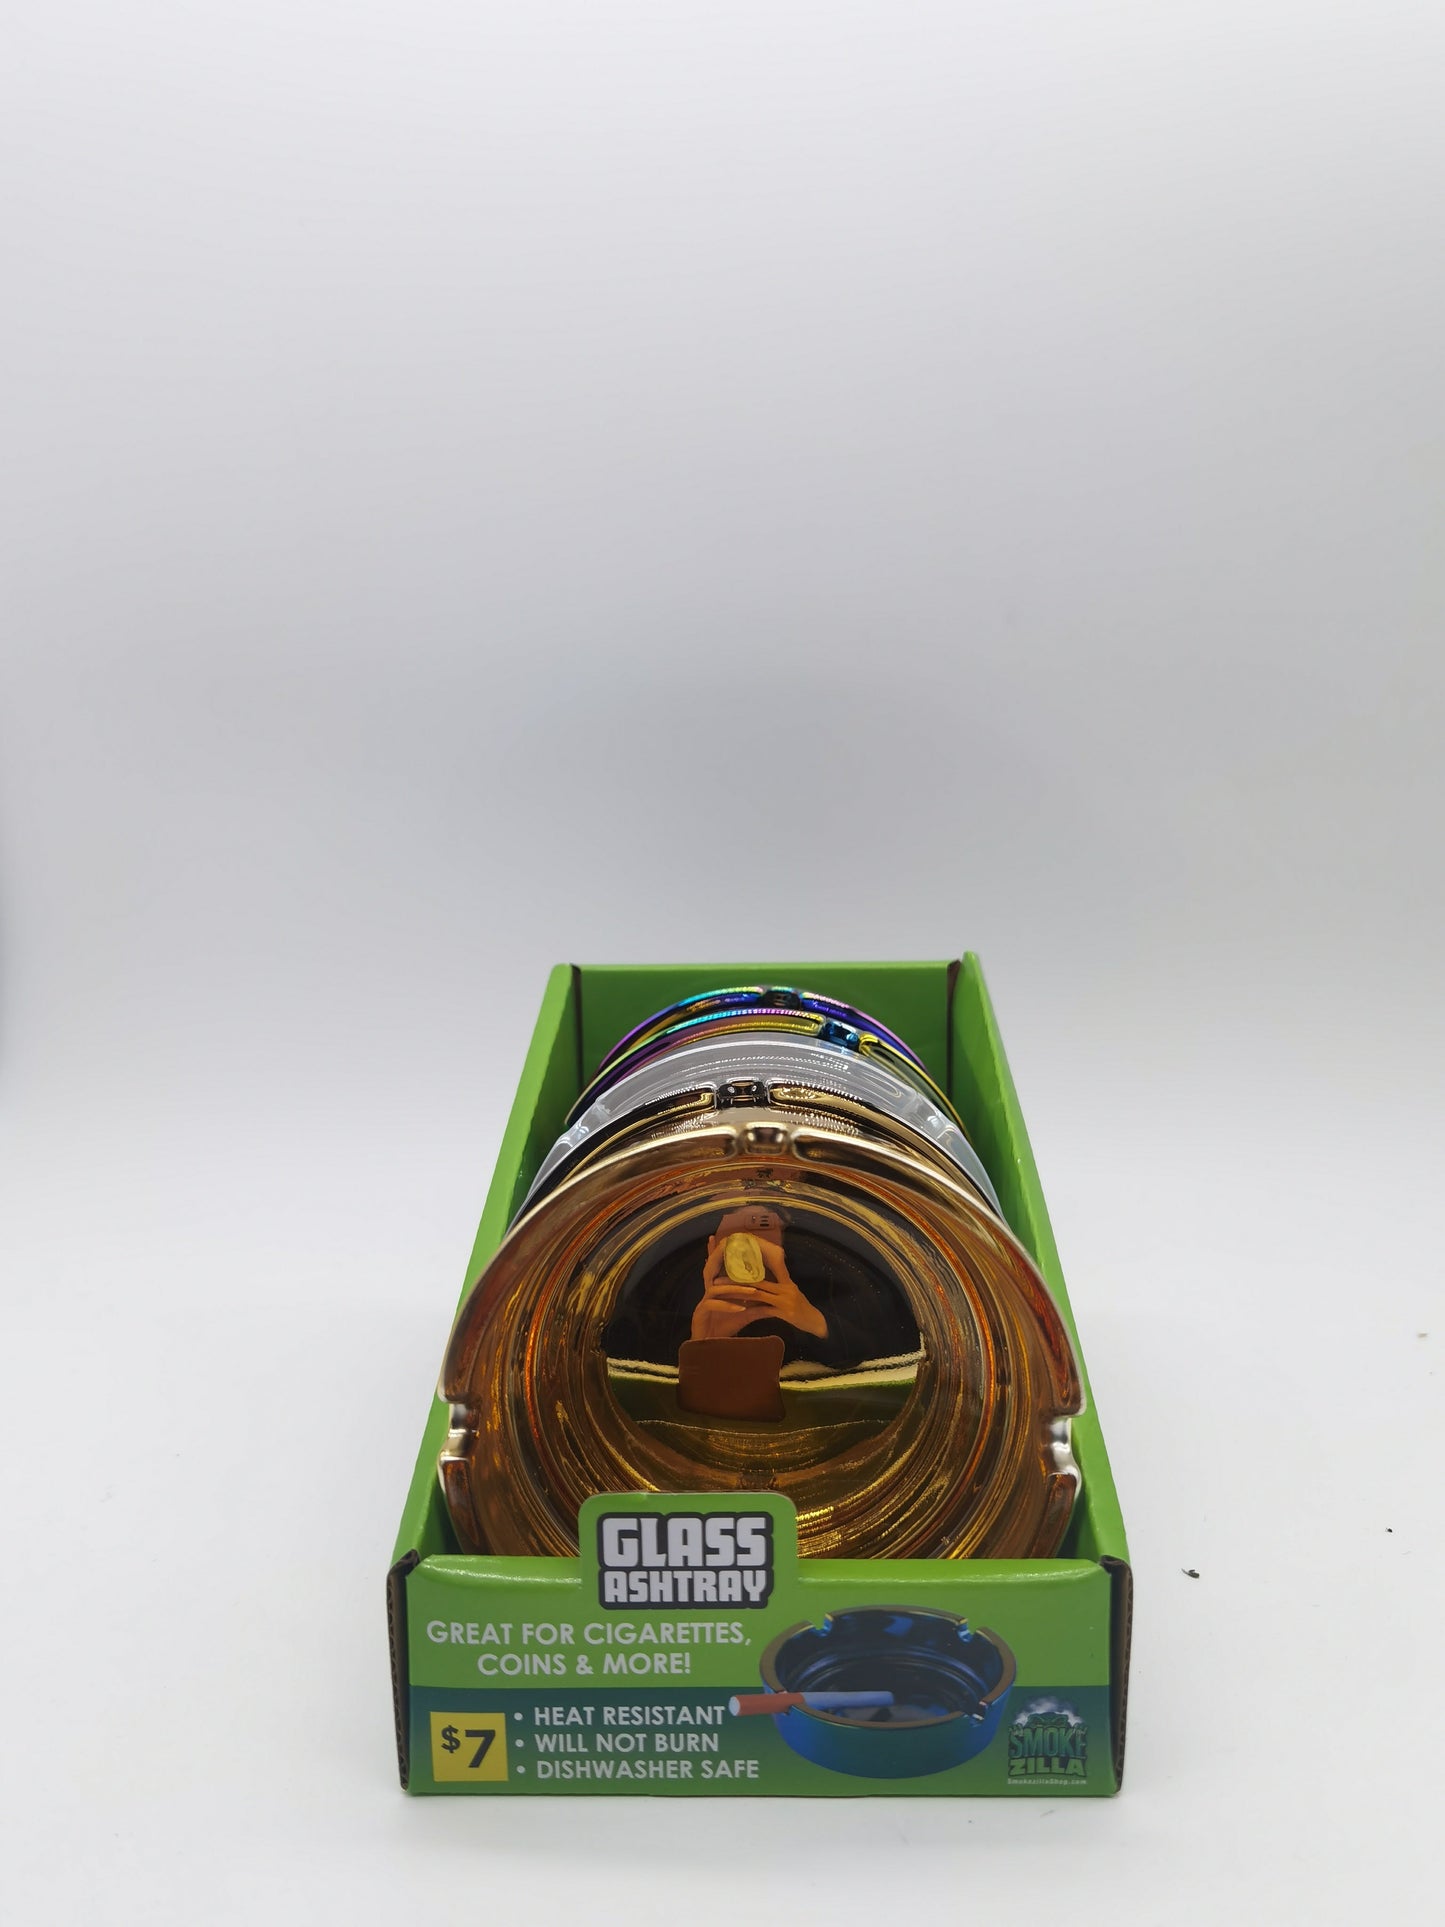 ITEM NUMBER 041466 PLATED GLASS ASHTRAY 5 PIECES PER DISPLAY